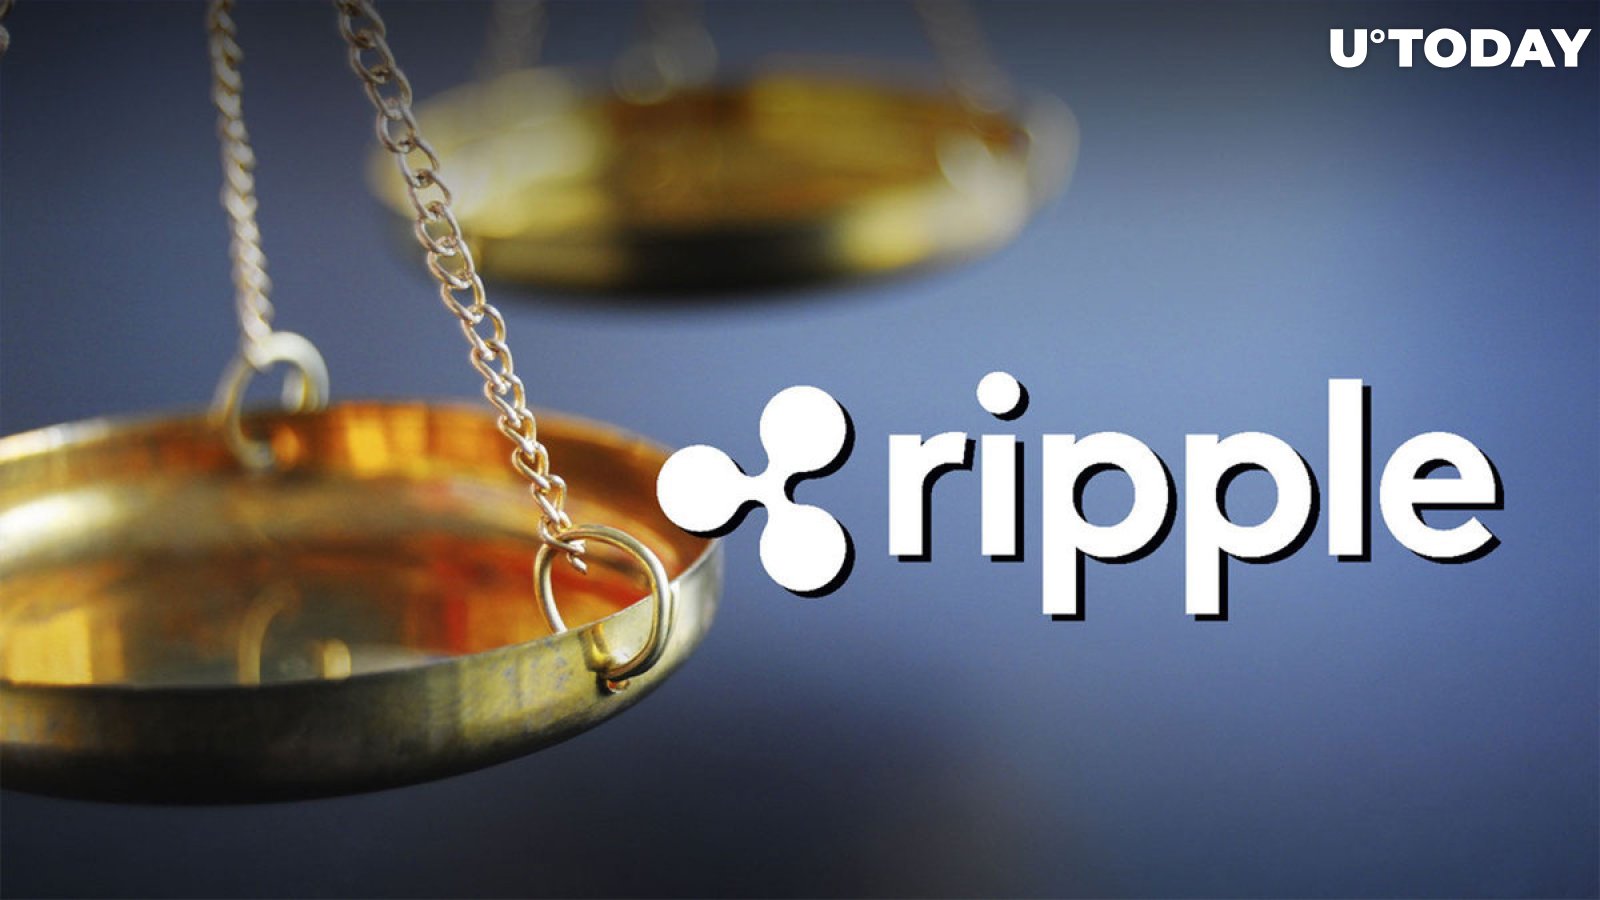 Ripple Lawsuit to Settle in June? Fresh Speculation Arises Following These Events